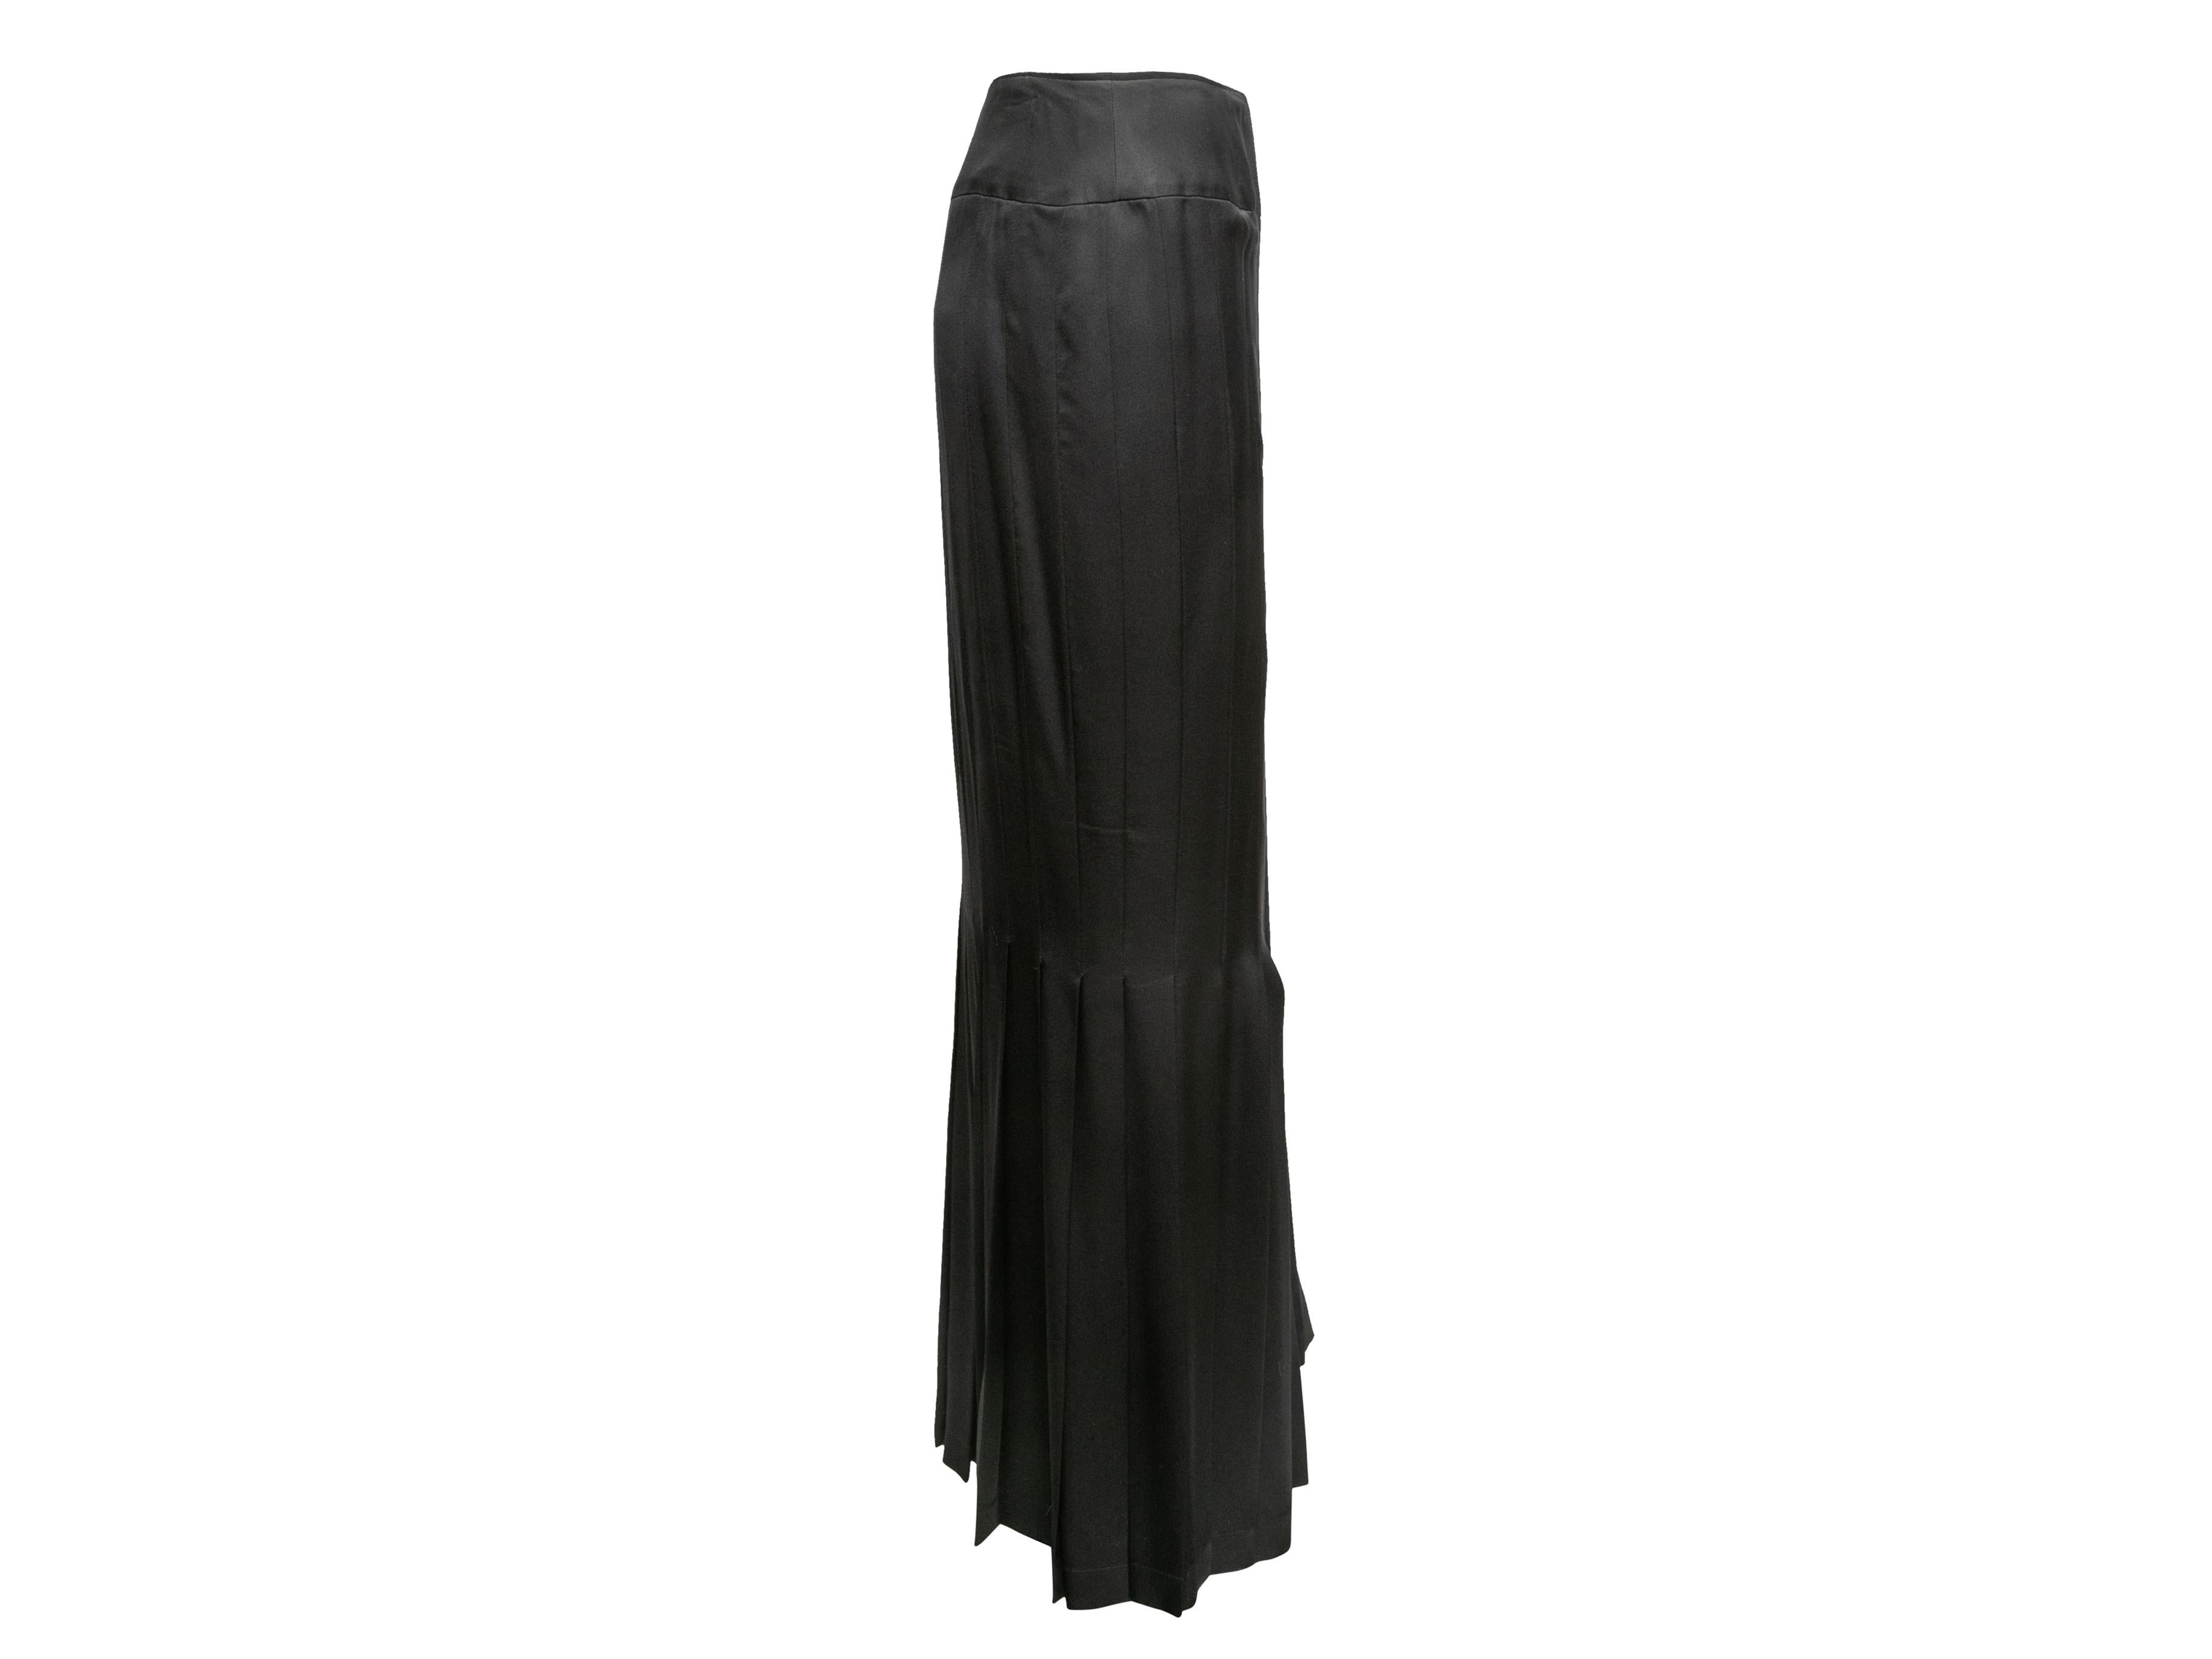 Vintage black pleated silk maxi skirt by Chanel. From the Cruise 2005 Collection. Zip closure at back. 37